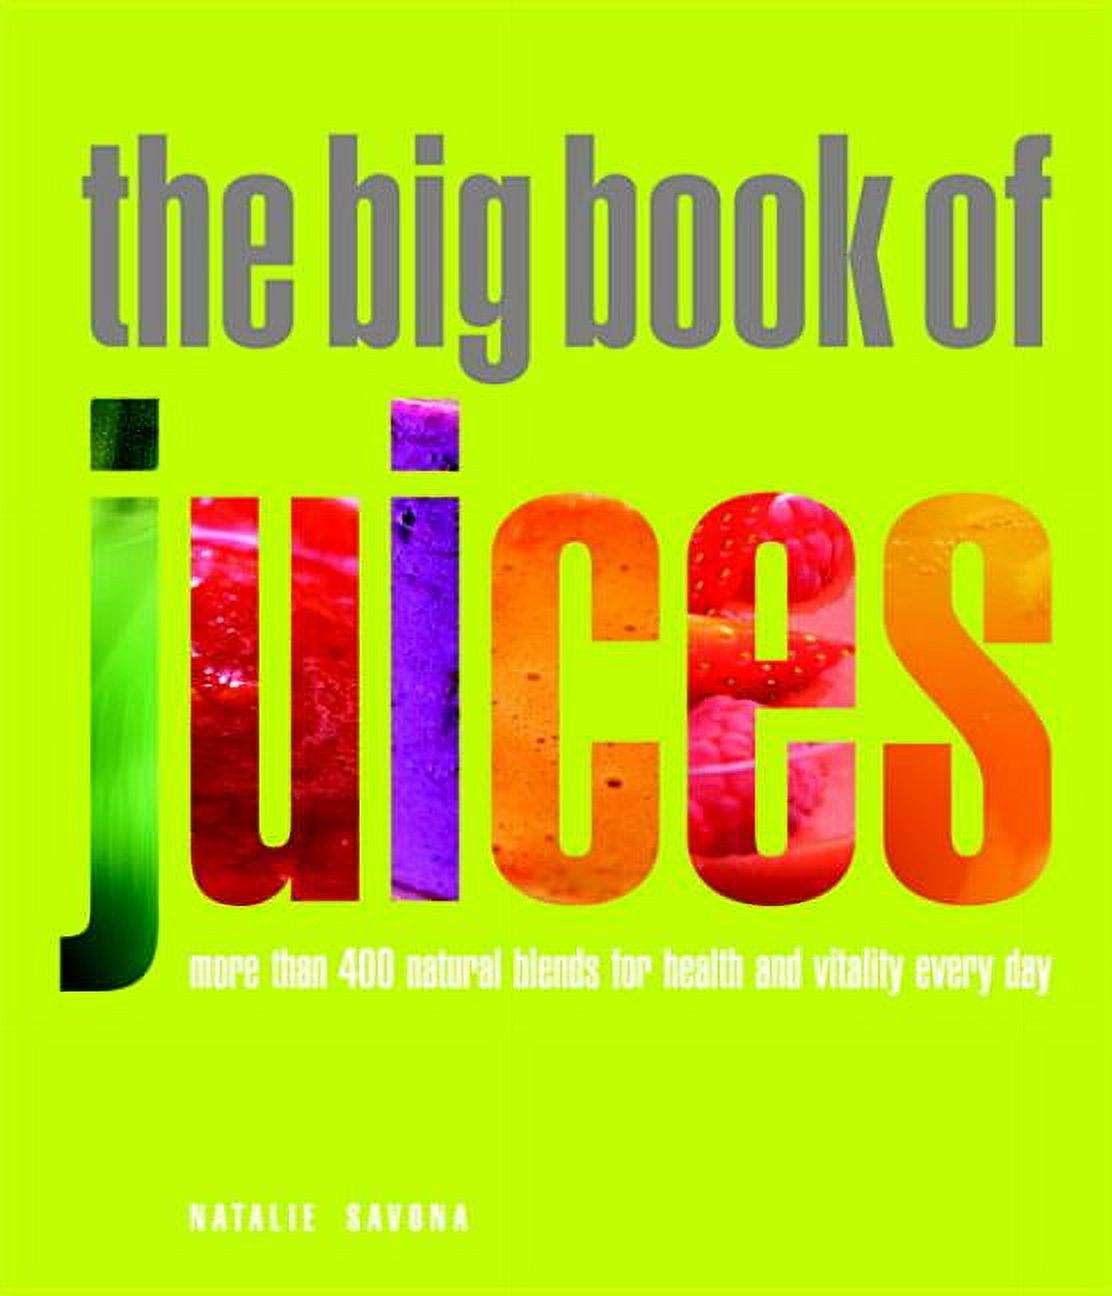 The Big Book of Juices : More than 400 Natural Blends for Health and Vitality Every Day (Paperback) - image 1 of 2